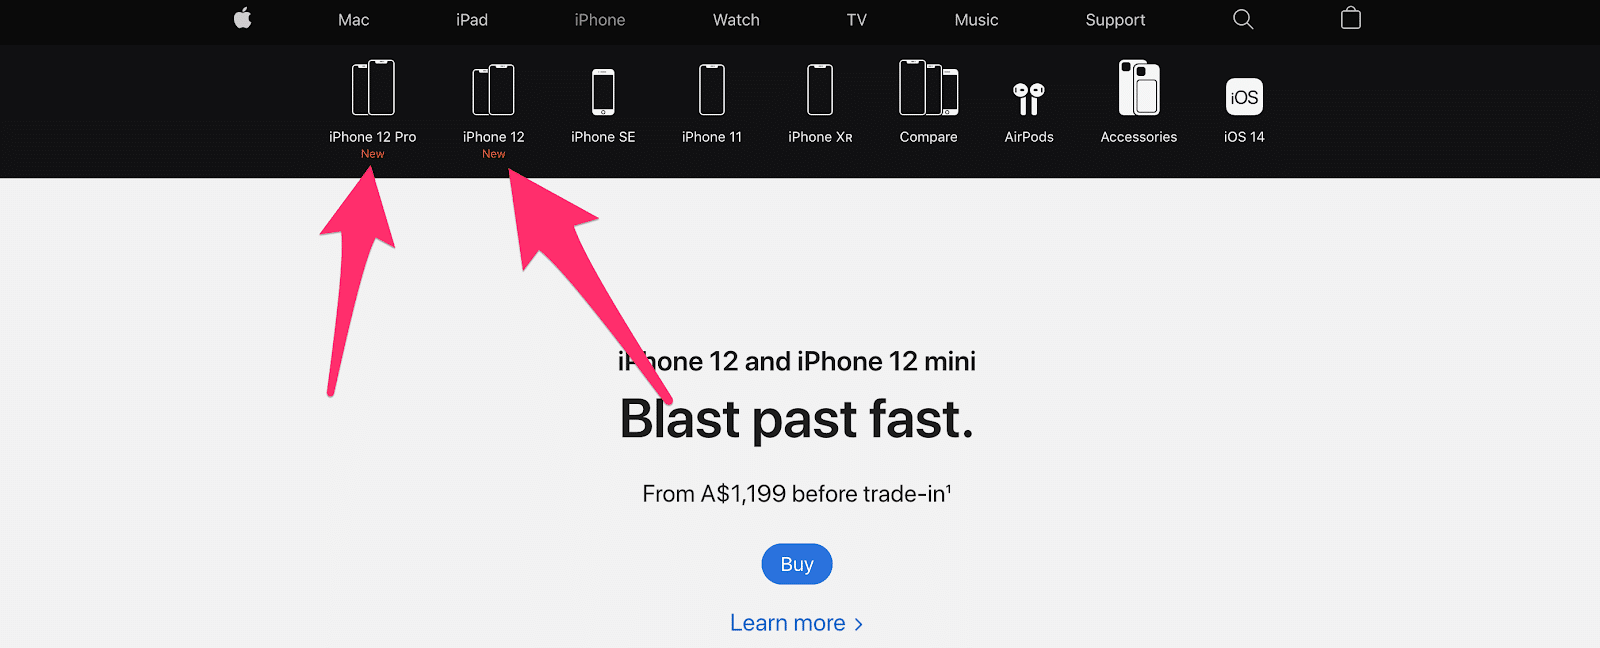 apple's homepage lists products labeled as new with the word new underneath